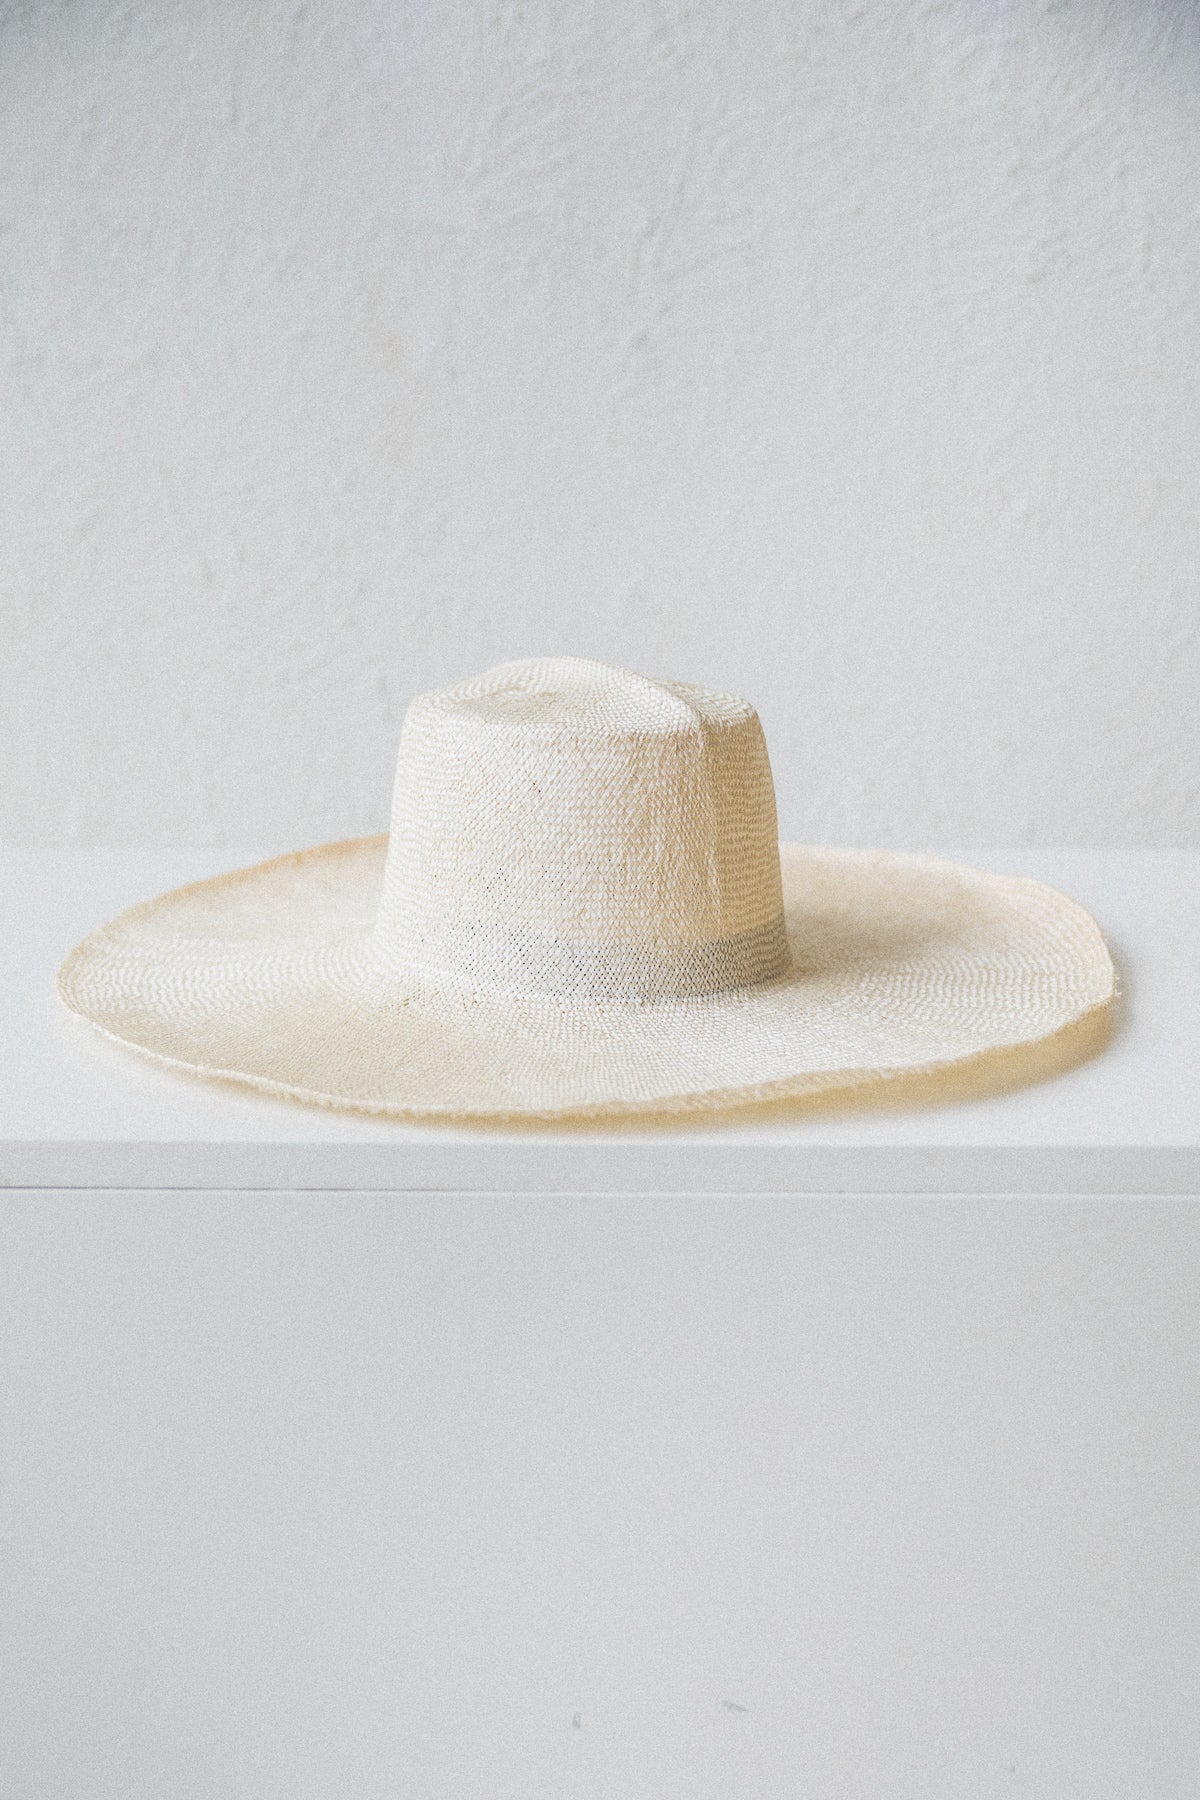 OPTIMO PACKABLE HAT IN NATURAL